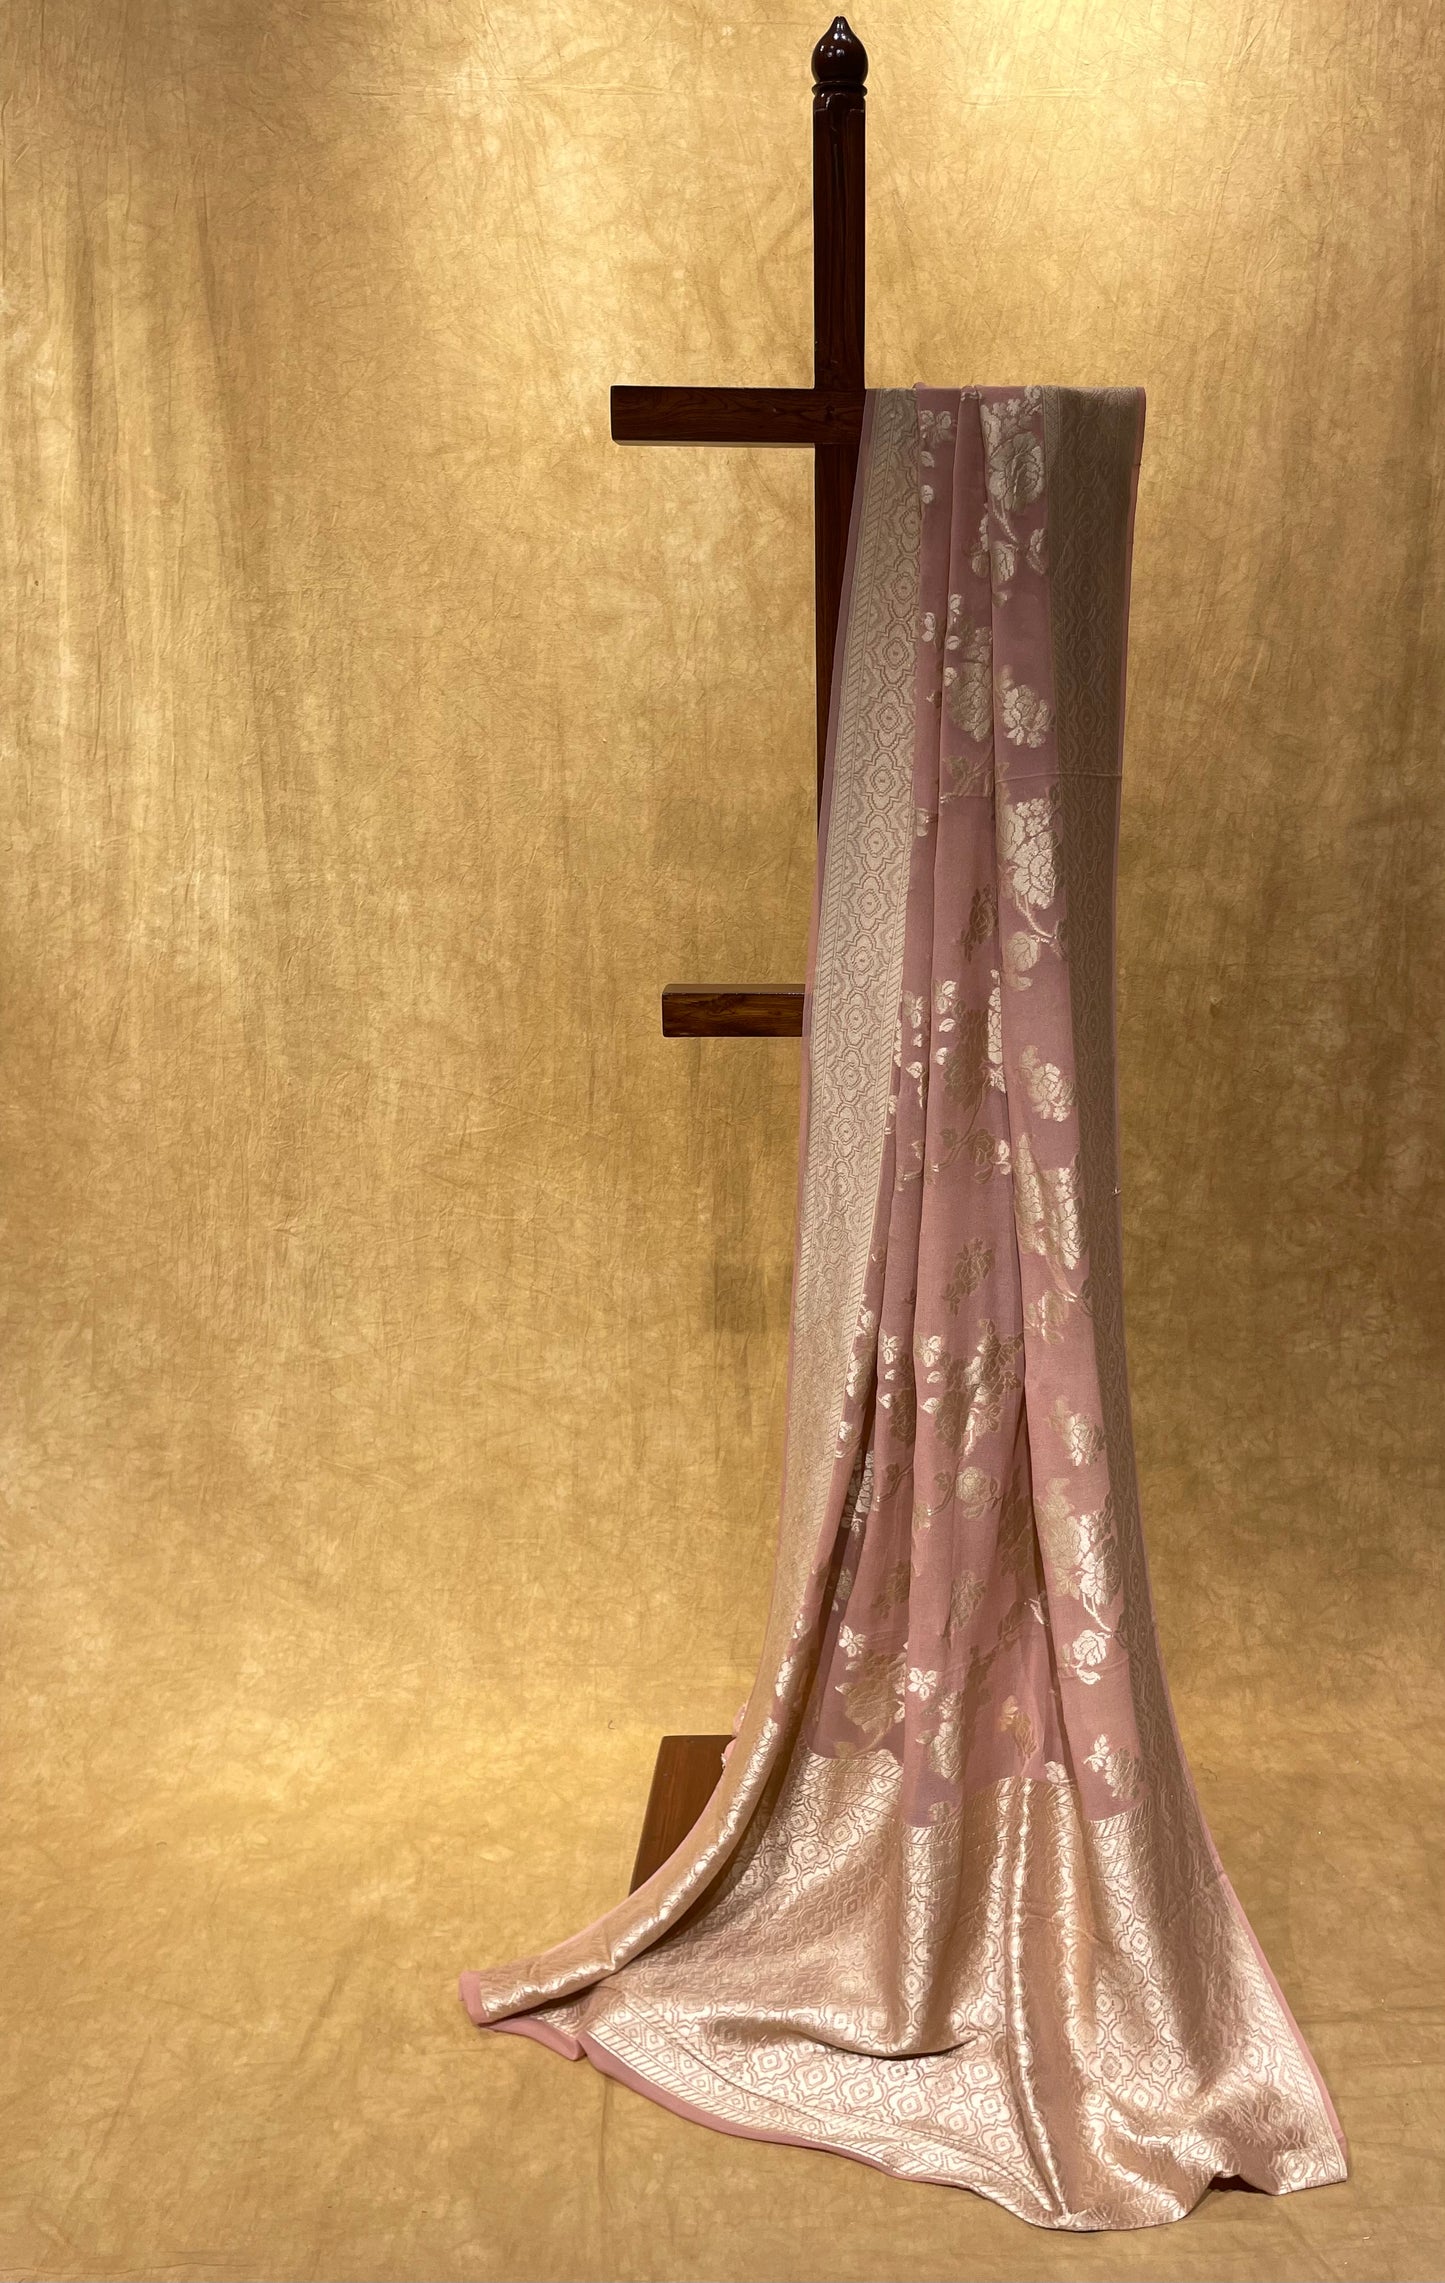 (DELIVERY IN 20-25 DAYS) PALE PINK COLOUR KHADDI PURE GEORGETTE SAREE